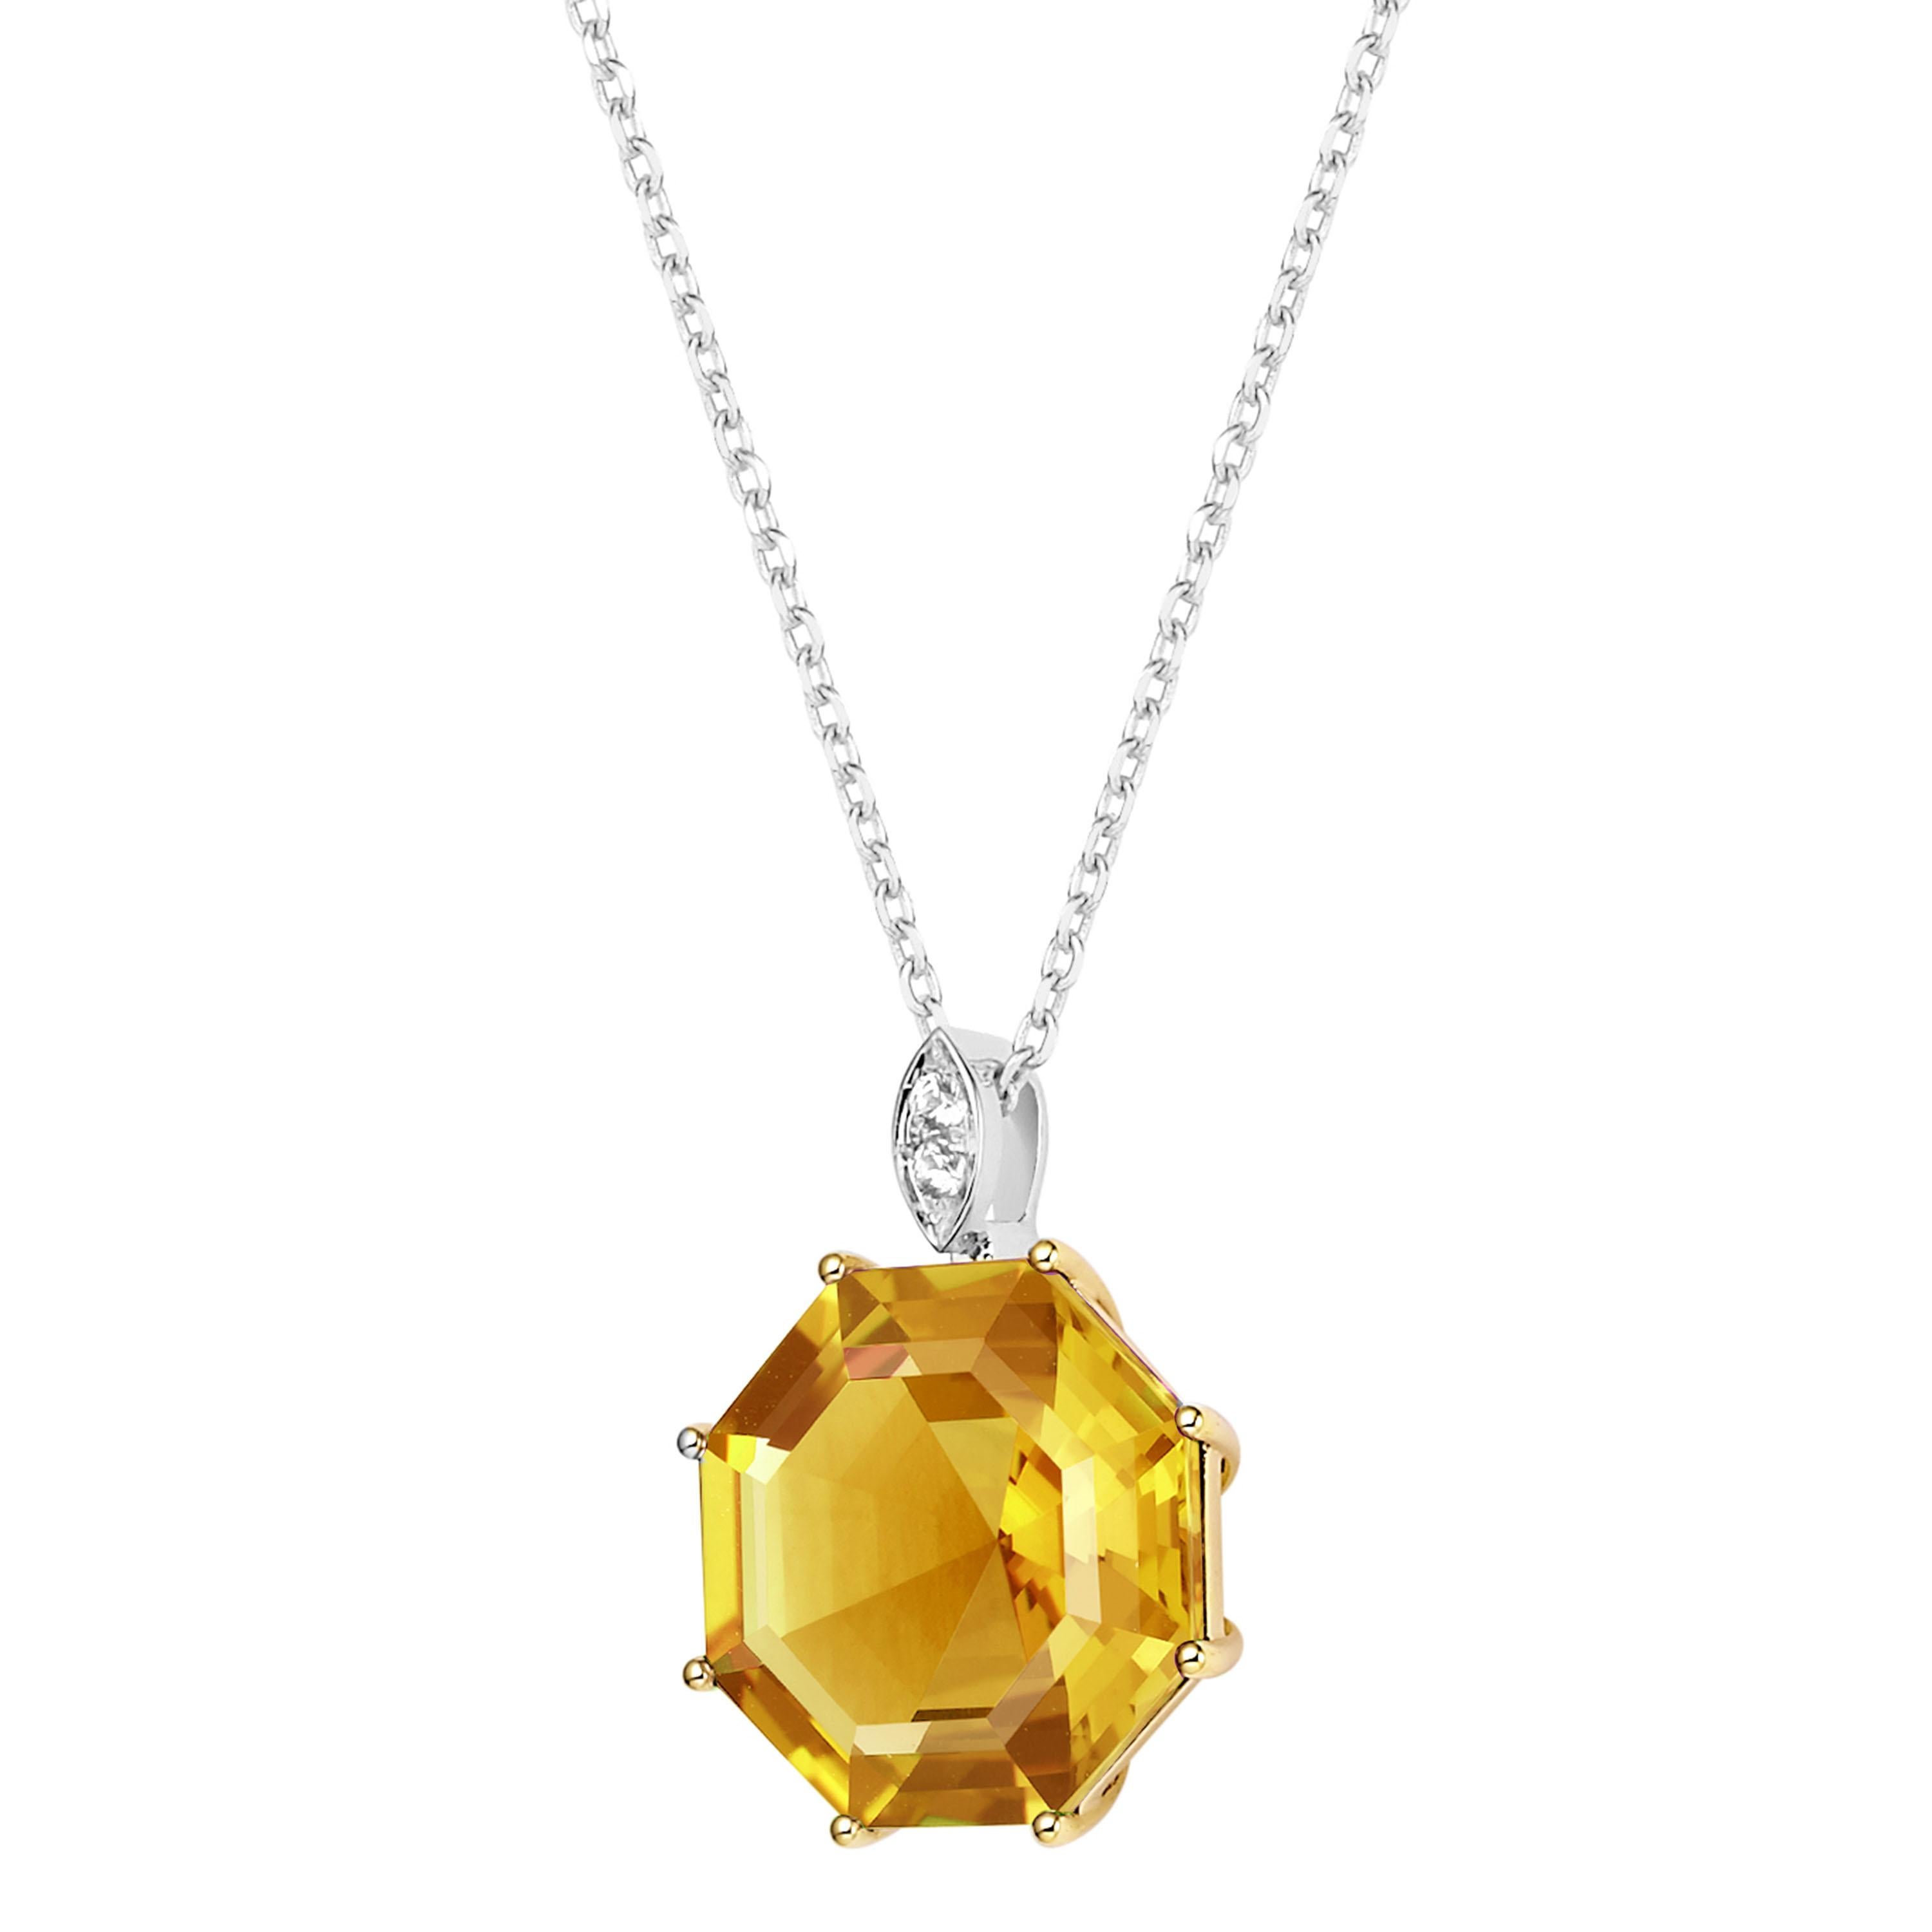 Description:
Victoriana large octagon pendant with 5ct citrine set in 18ct yellow gold, and 0.023ct white diamonds set in white rhodium plate on 18ct yellow gold. Chain length is 16 inches + 2 inch extension.

Inspiration:
A deluxe 18ct gold